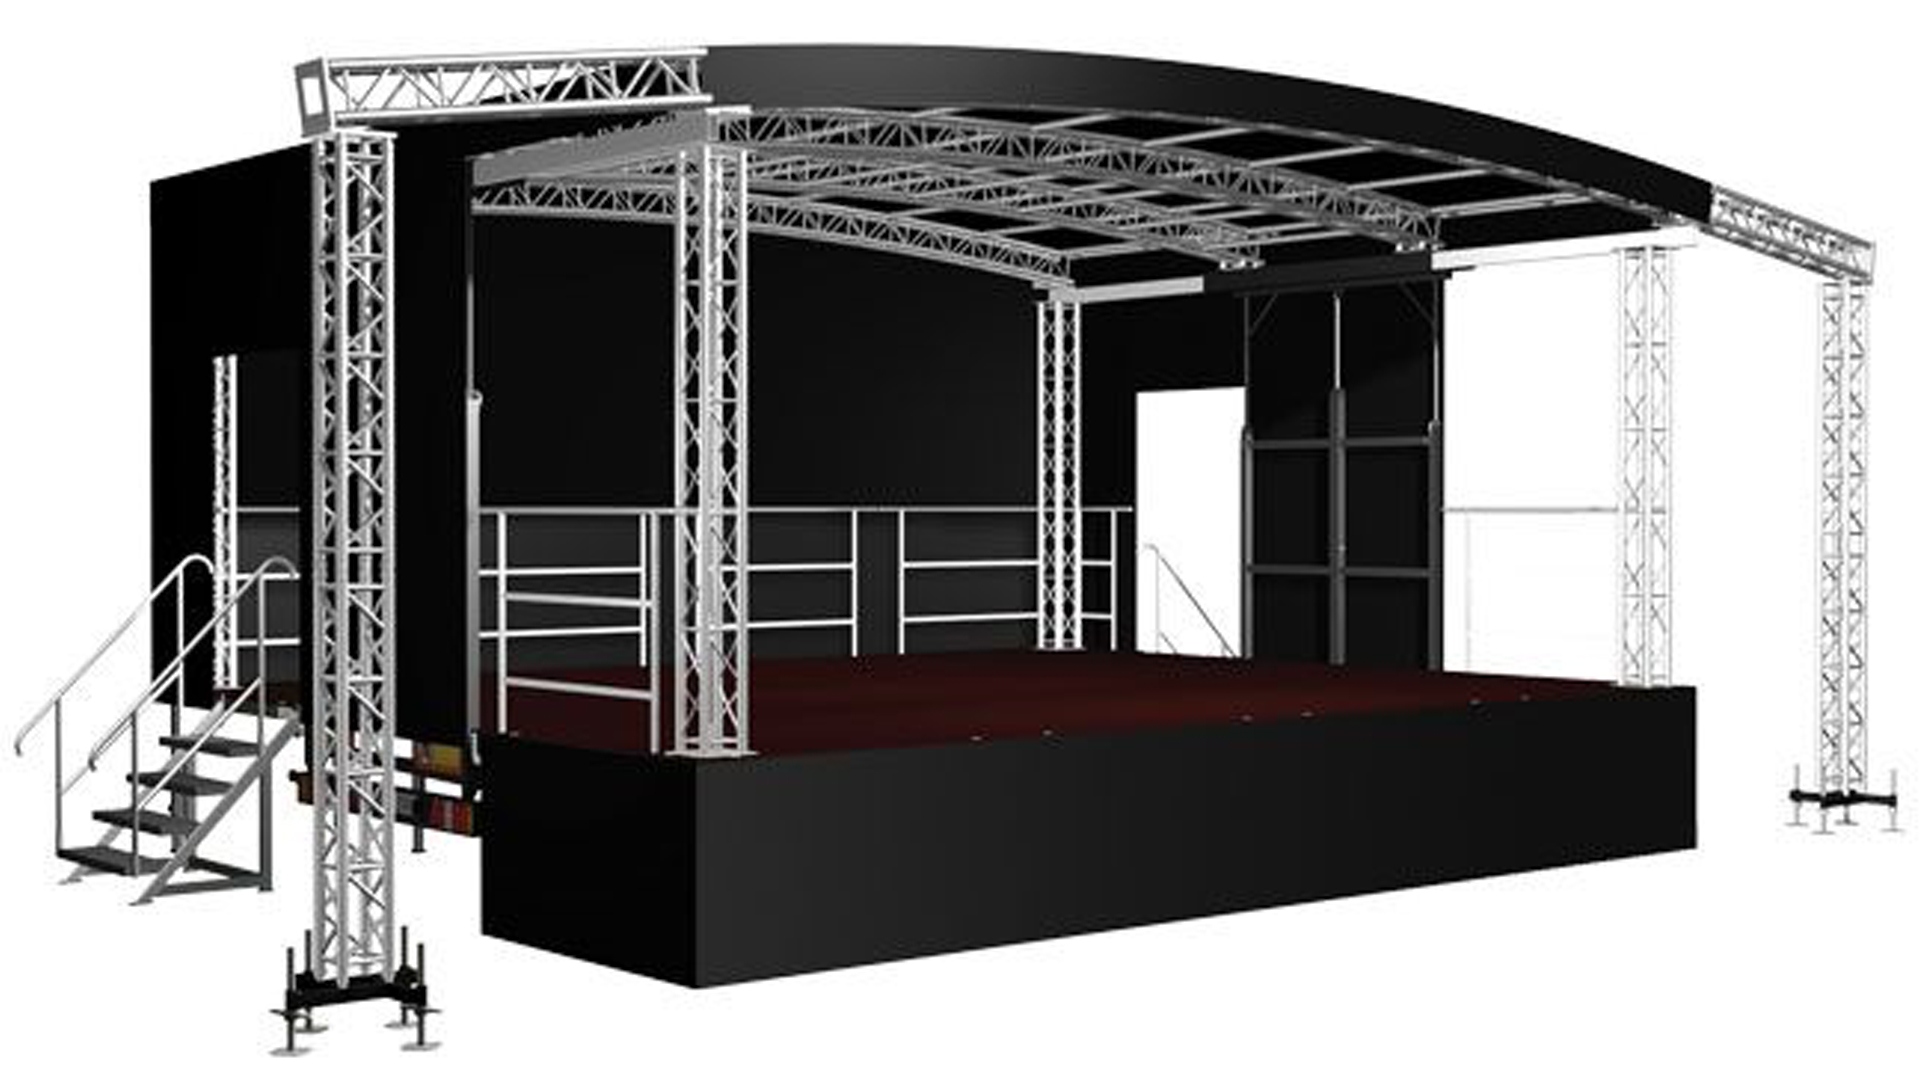 Hire mobile outdoor event trailer canopy truss stage in Carmarthenshire, Pembrokeshire, Cardiff, Newport, Swansea, Ceredigion, South West Wales.